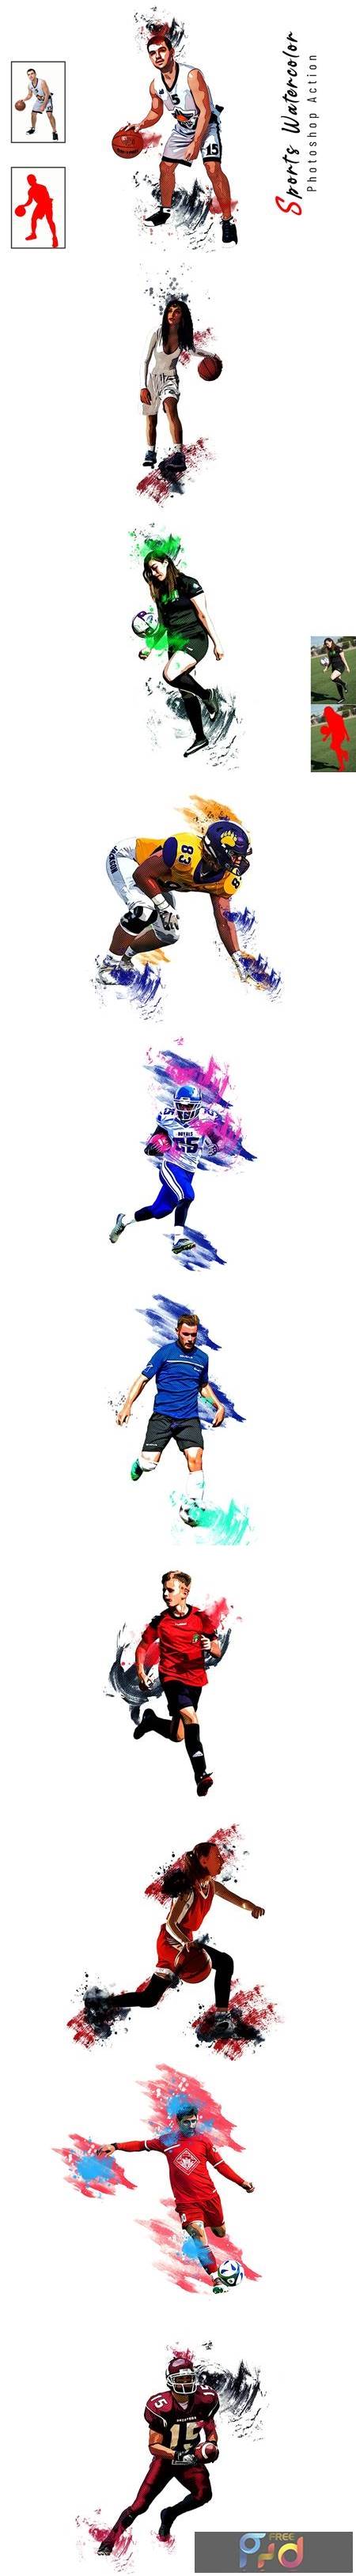 Sports Watercolor Photoshop Action 6725657 1